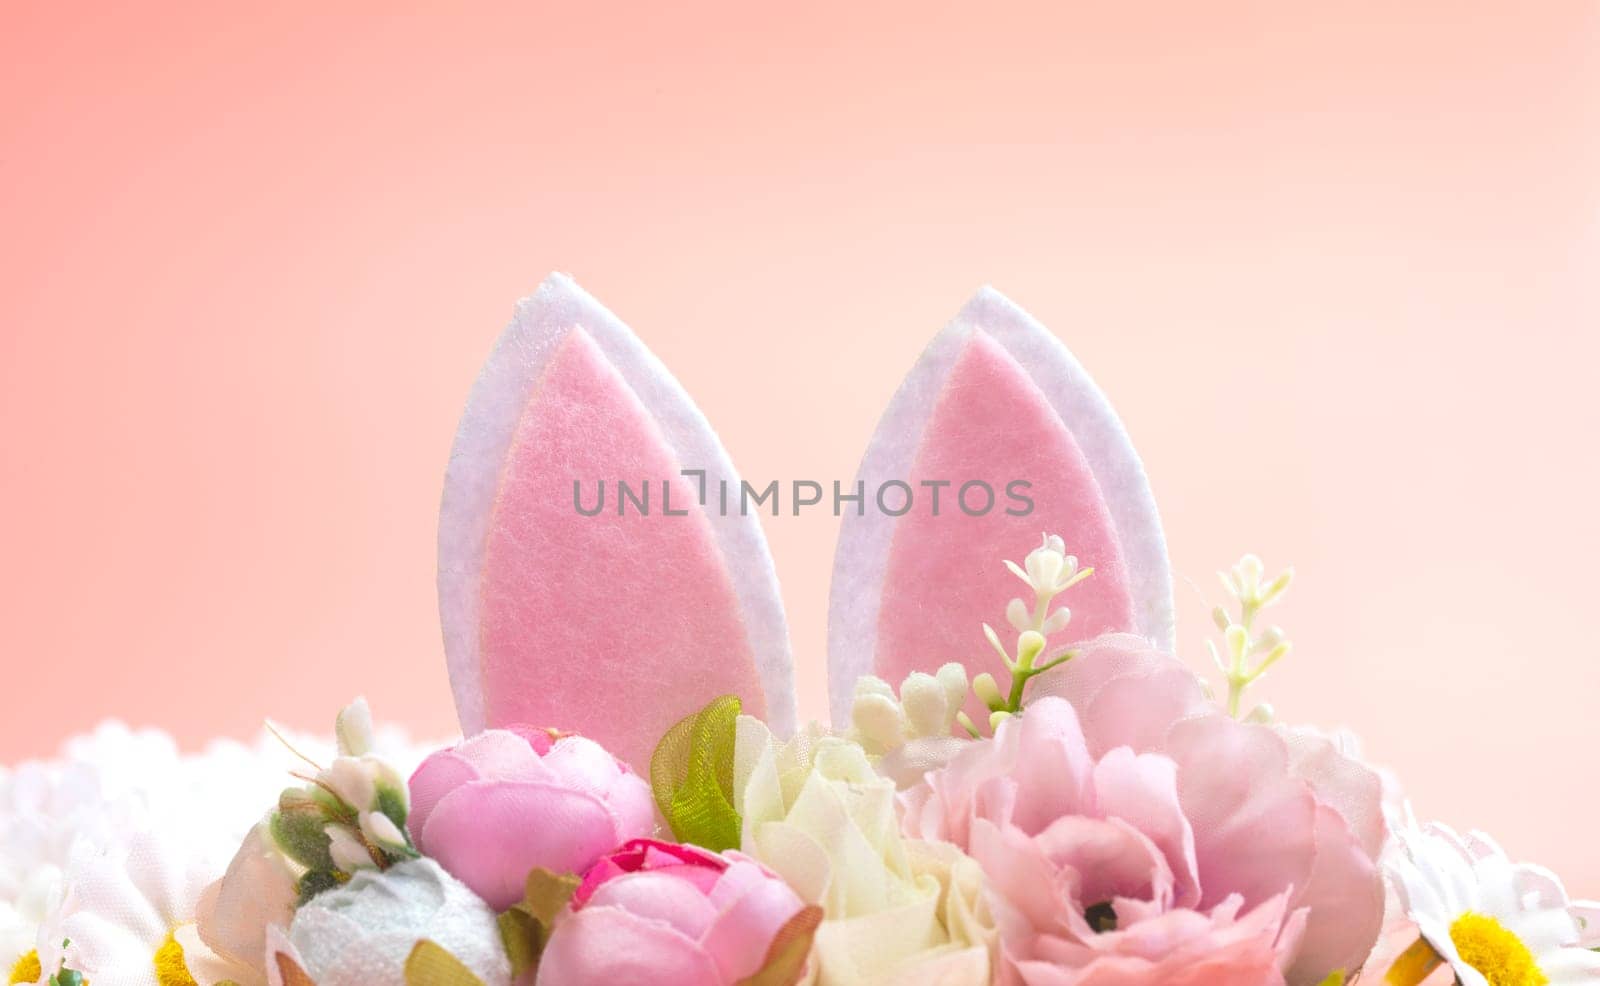 Spring holidays creative background with bunny ears decorated with bloom flowers on pastel pink theme. Creative copy space Easter concept space for text